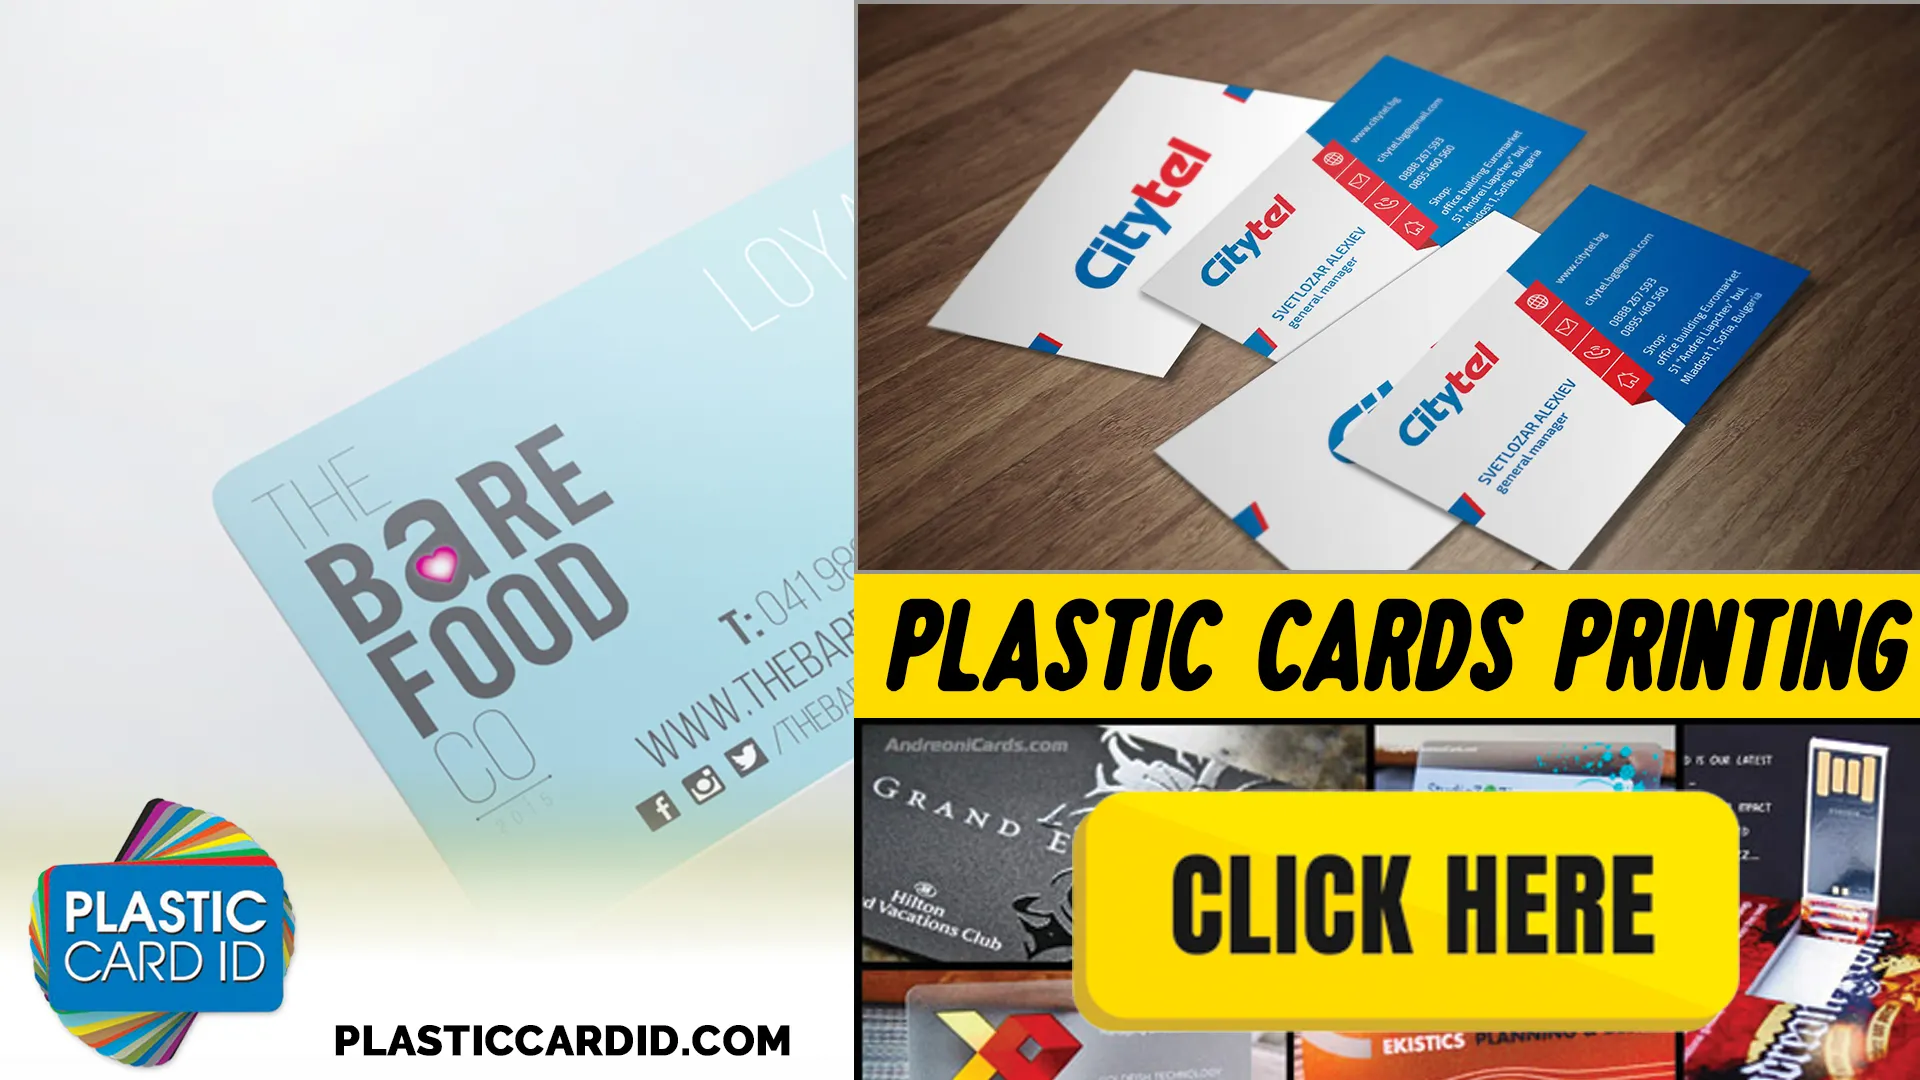 Welcome to Plastic Card ID




: Champions of Card Care and Customer Service